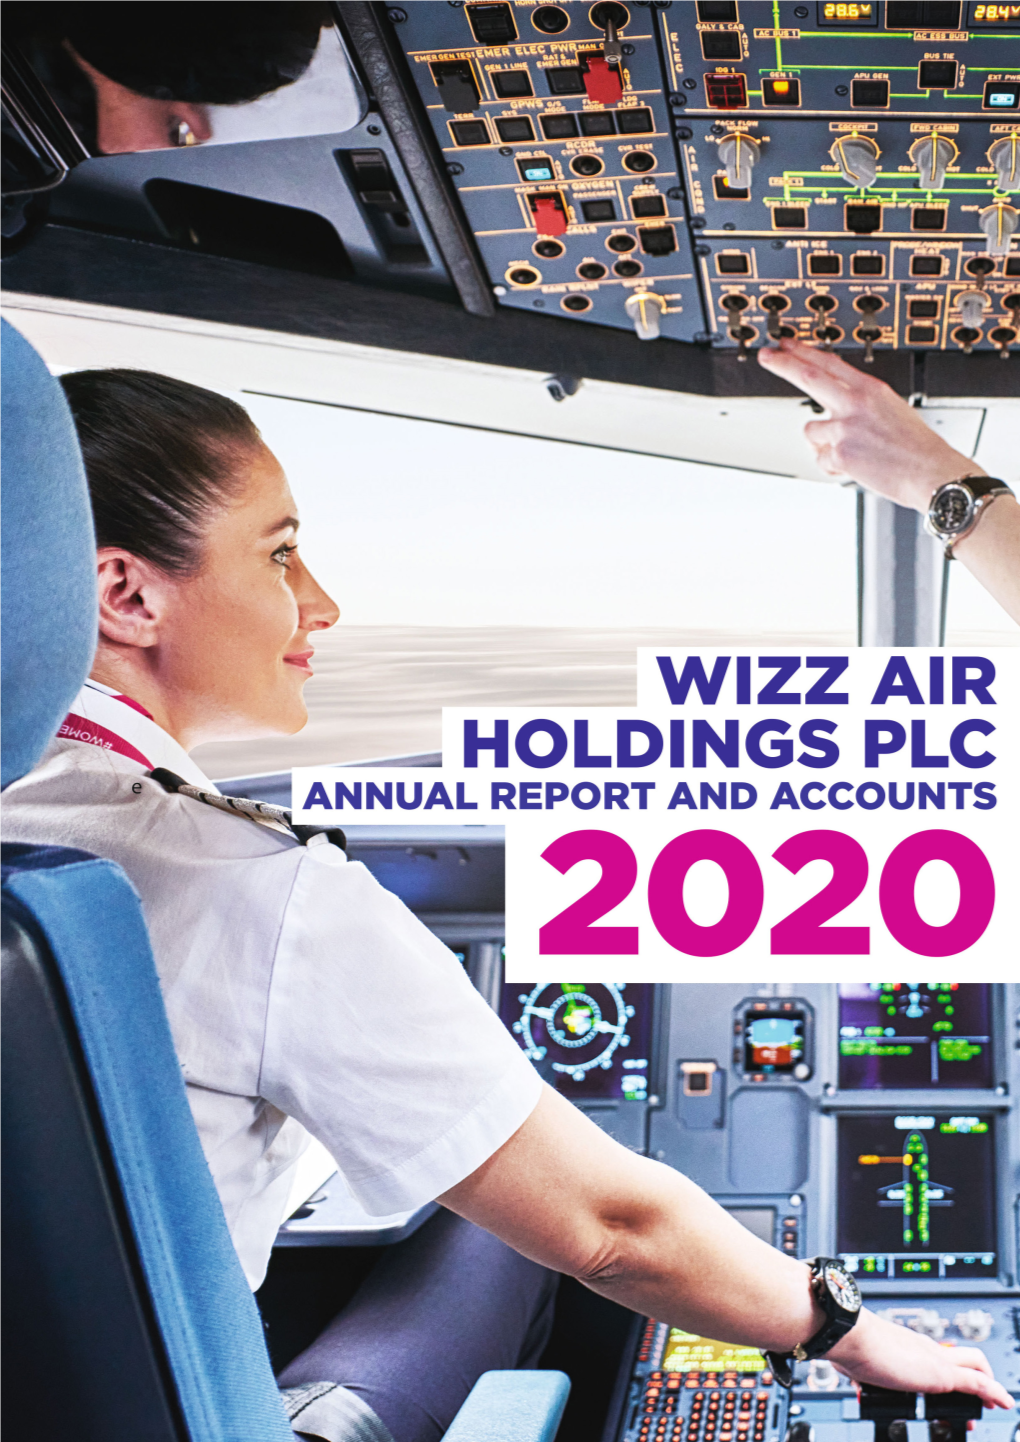 Wizz Air Holdings Plc Annual Report and Accounts 2020 1 HIGHLIGHTS